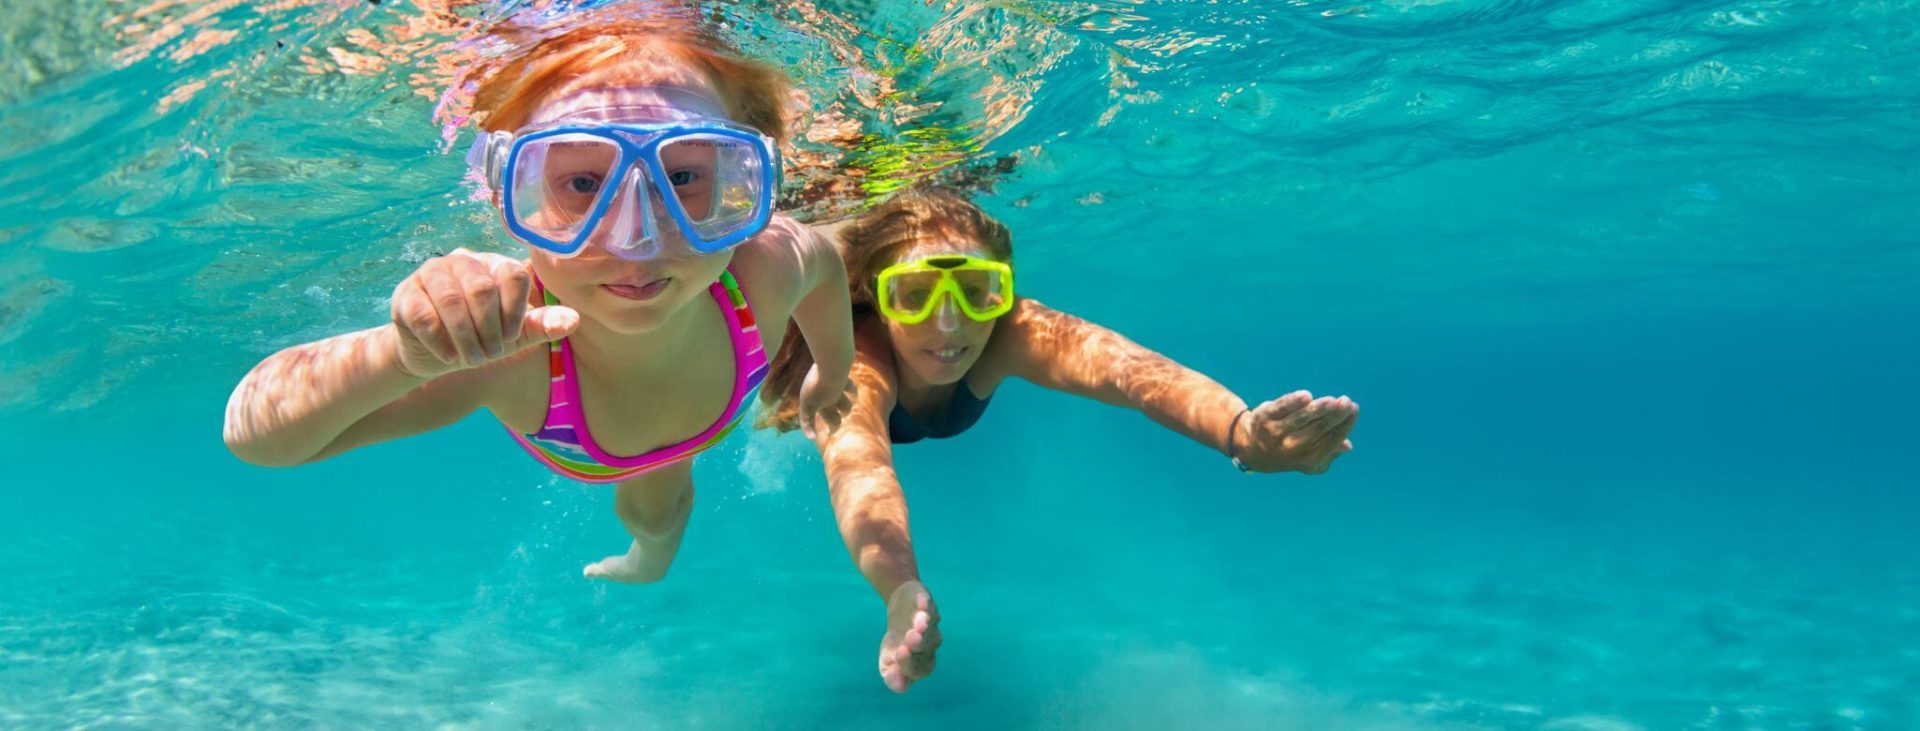 Image of two little girls snorkelling in the blue water.